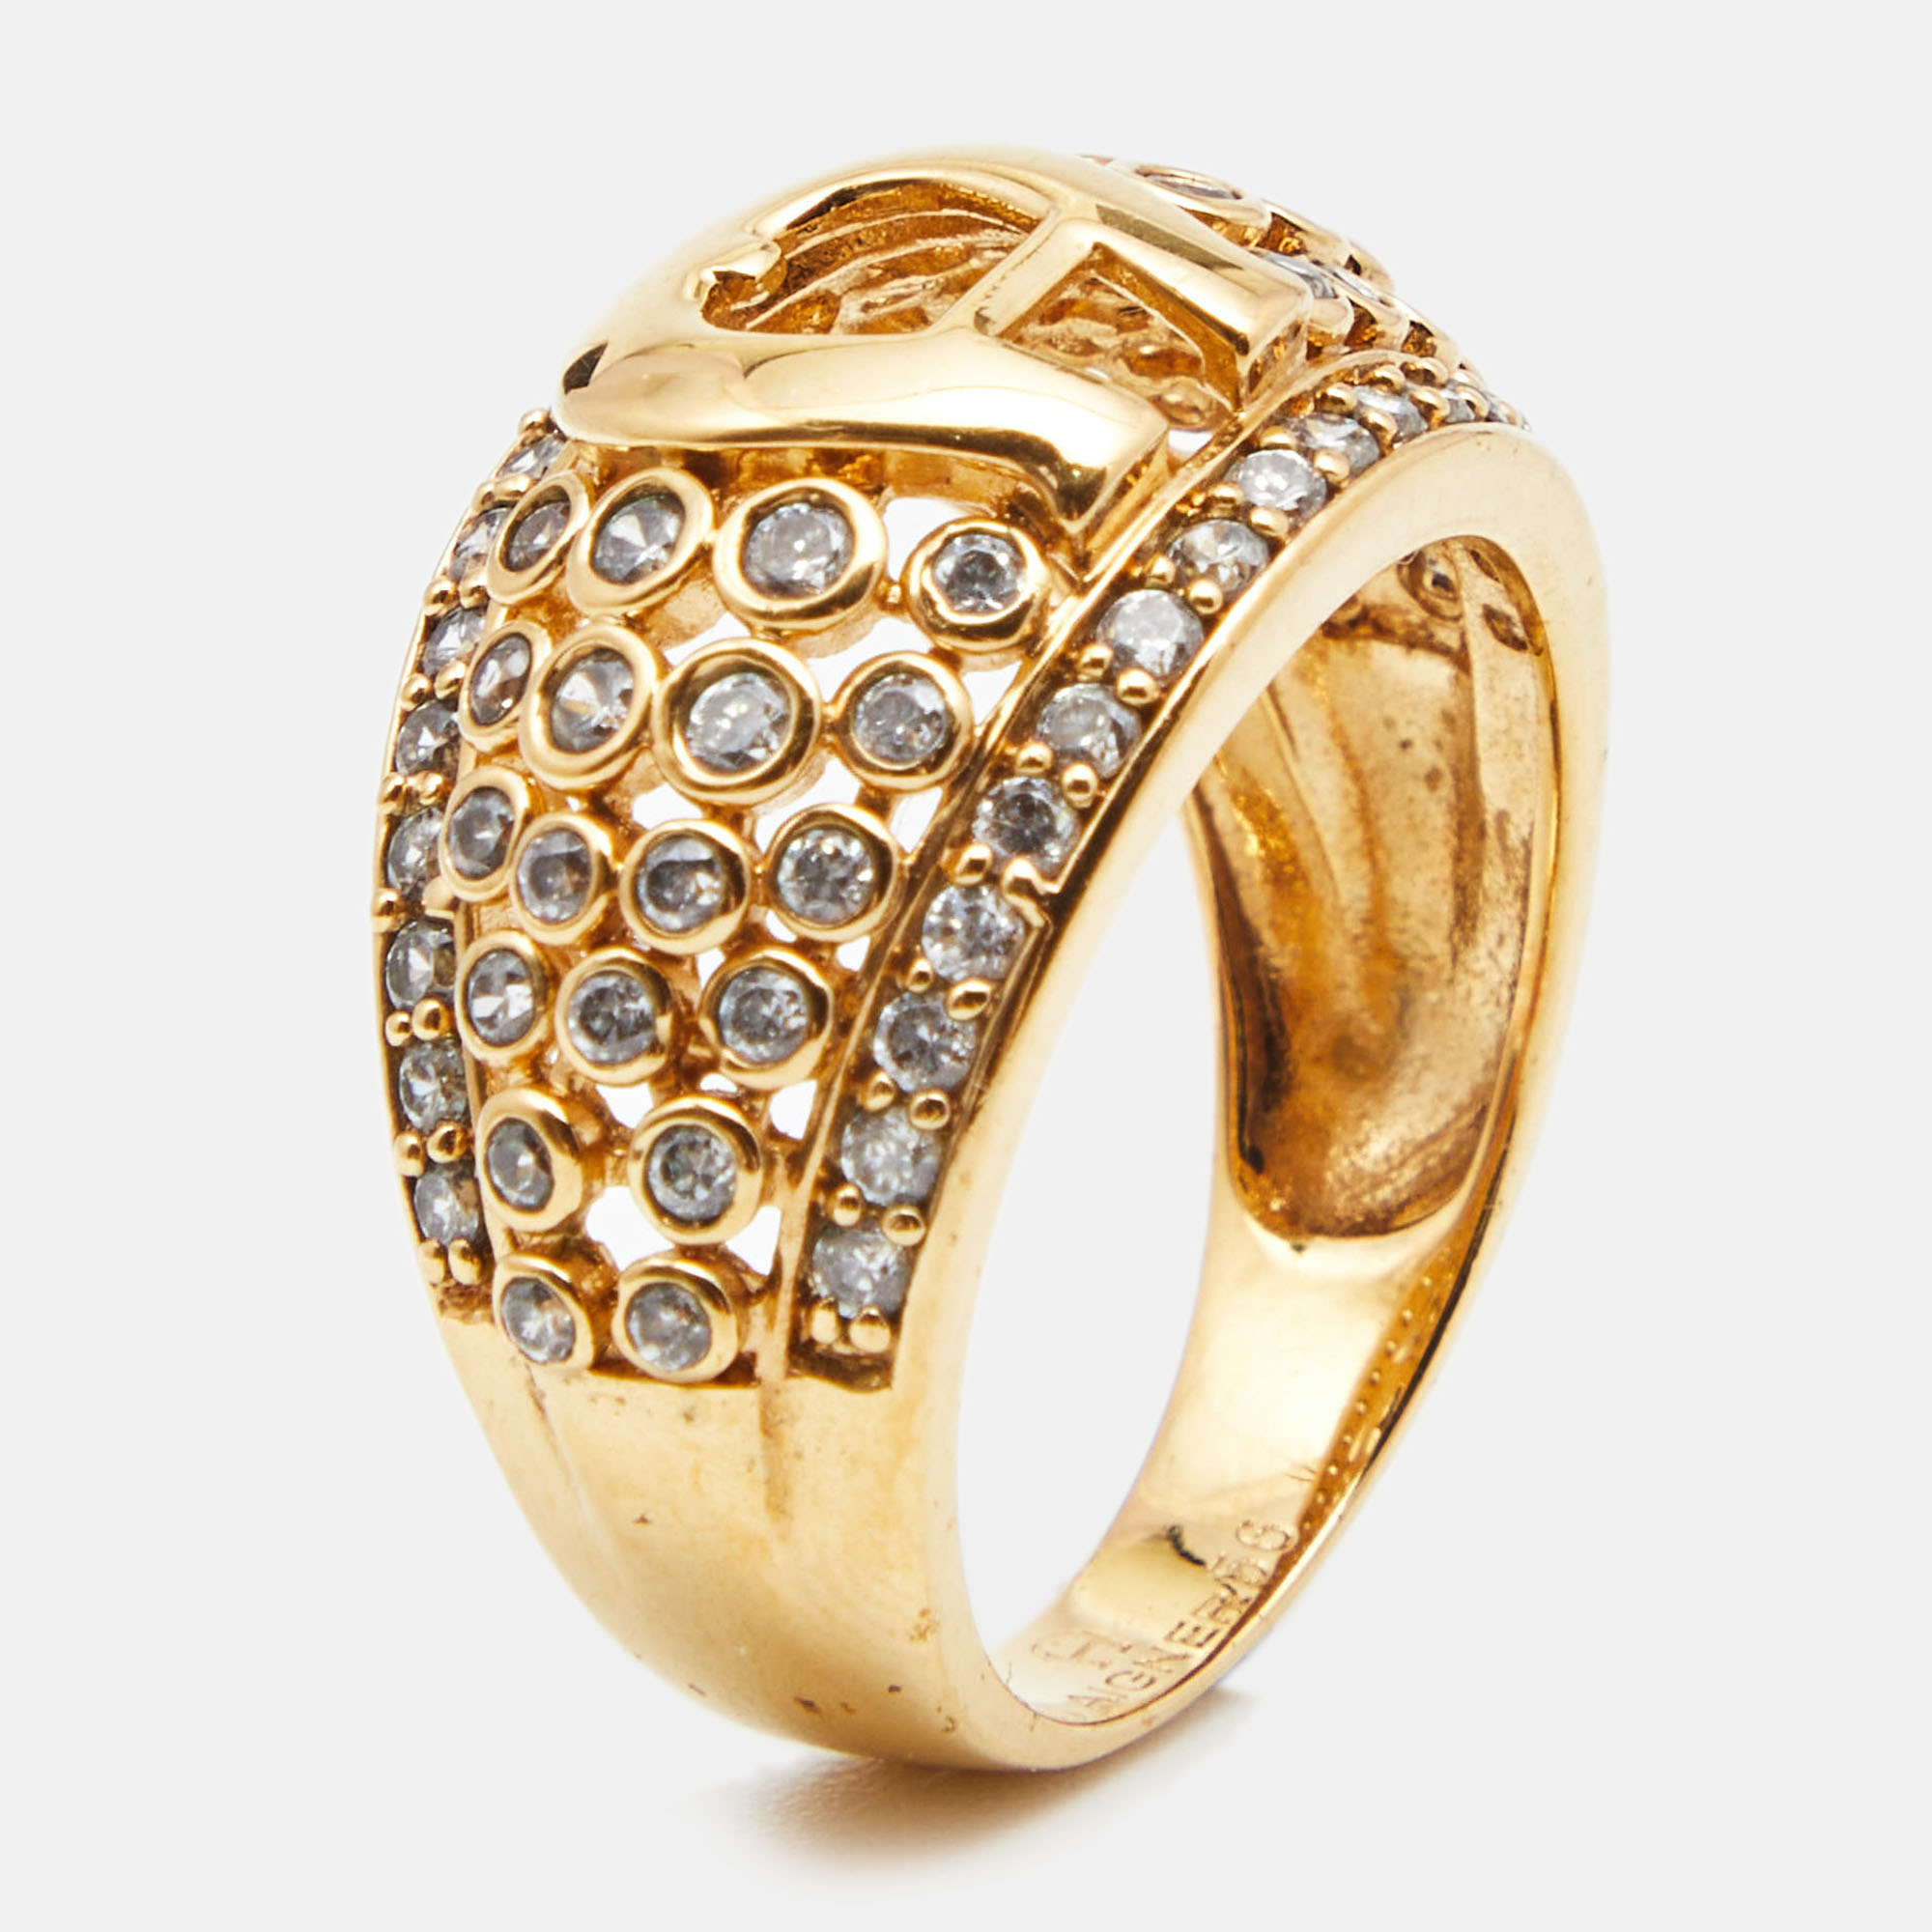 Aigner Crystals Gold Tone Ring Size 56